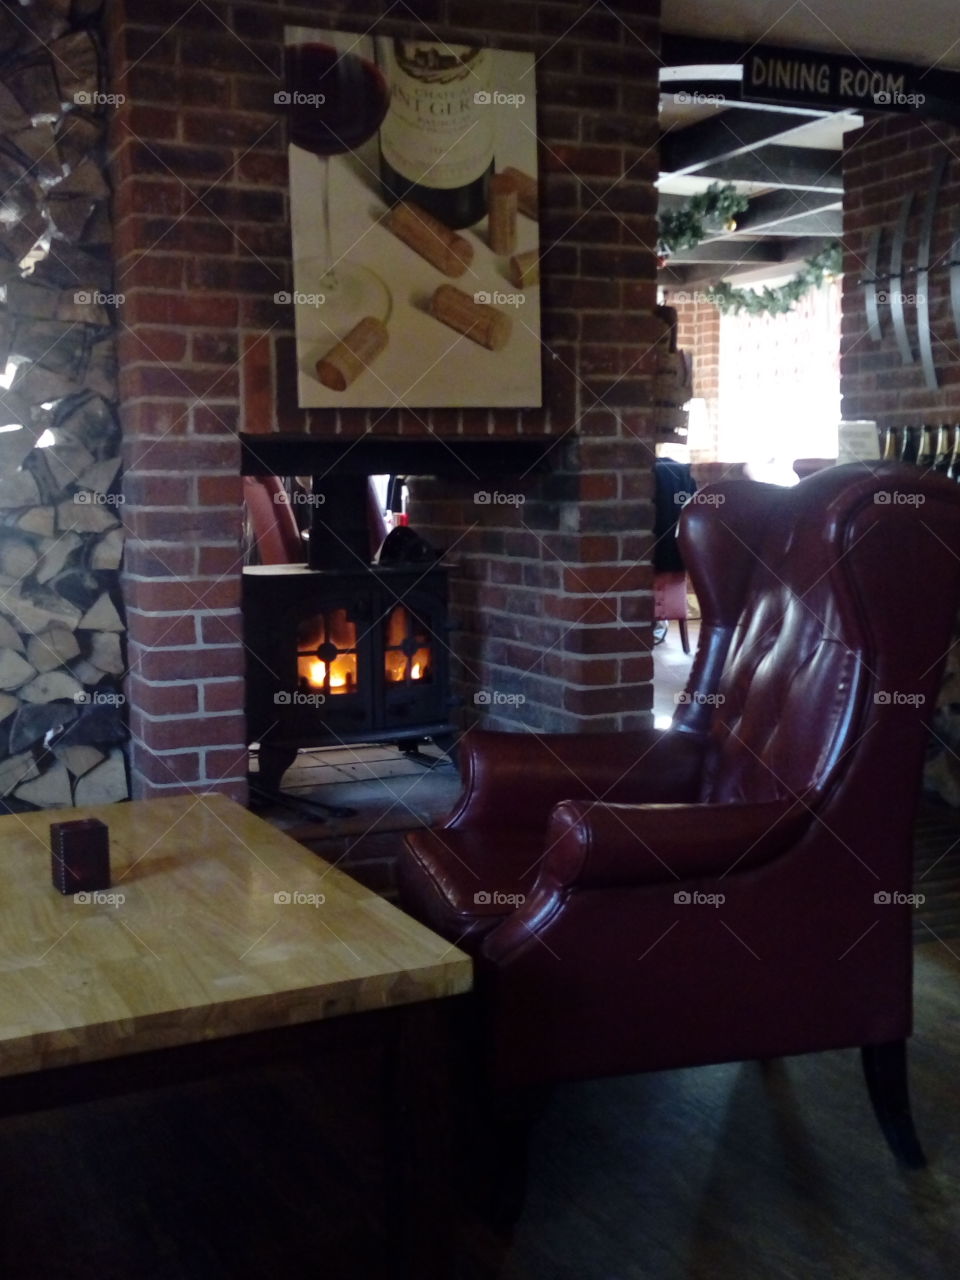 By the fire in a British pub